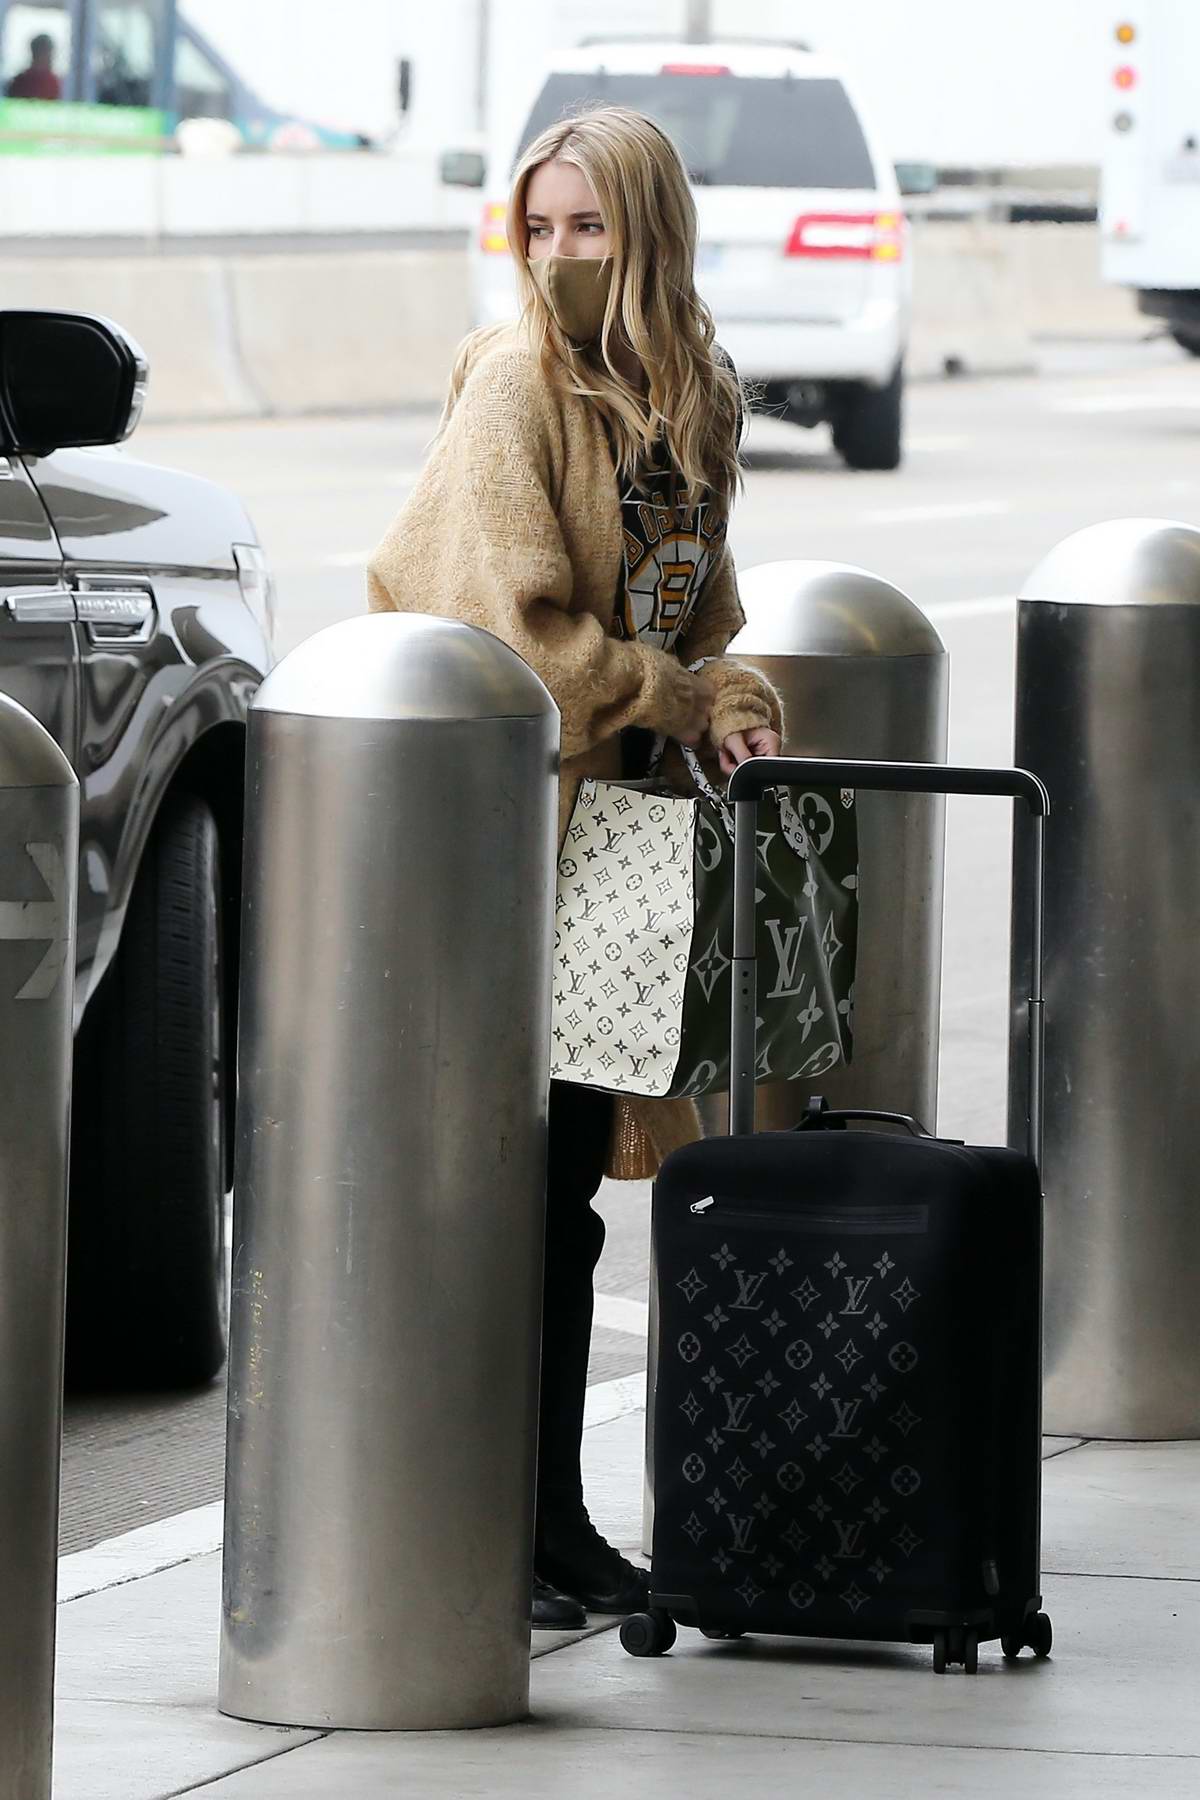 Emma Roberts: LV Luggage at LAX: Photo 559288, Emma Roberts Pictures